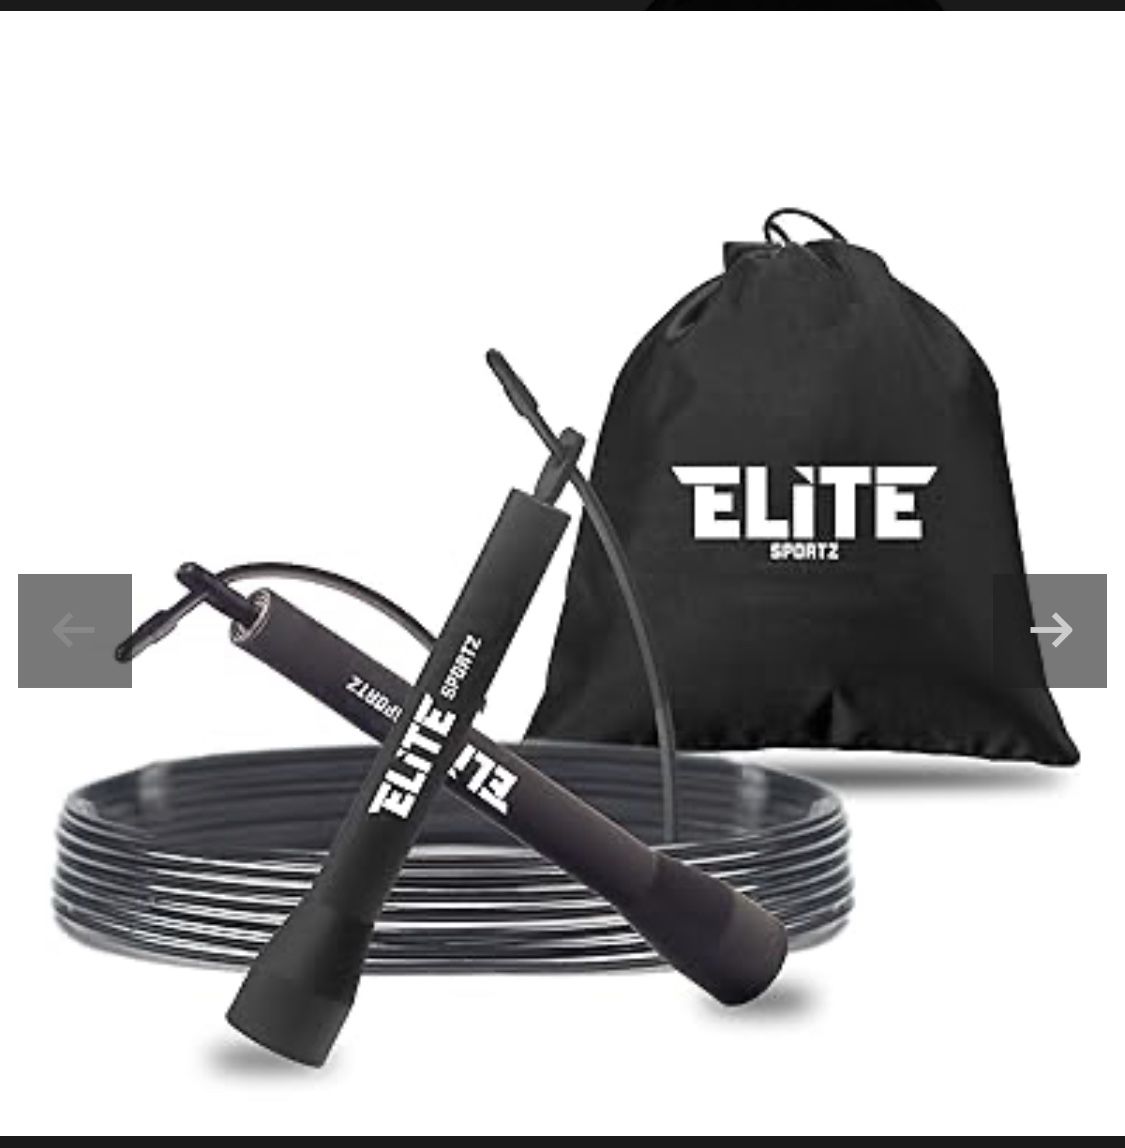 Elite Sportz Jump Rope for Men and Women - Lightweight Skipping Rope for Gym or Home Workout - Adjustable Jump Ropes for Fitness Training, Boxing, MMA